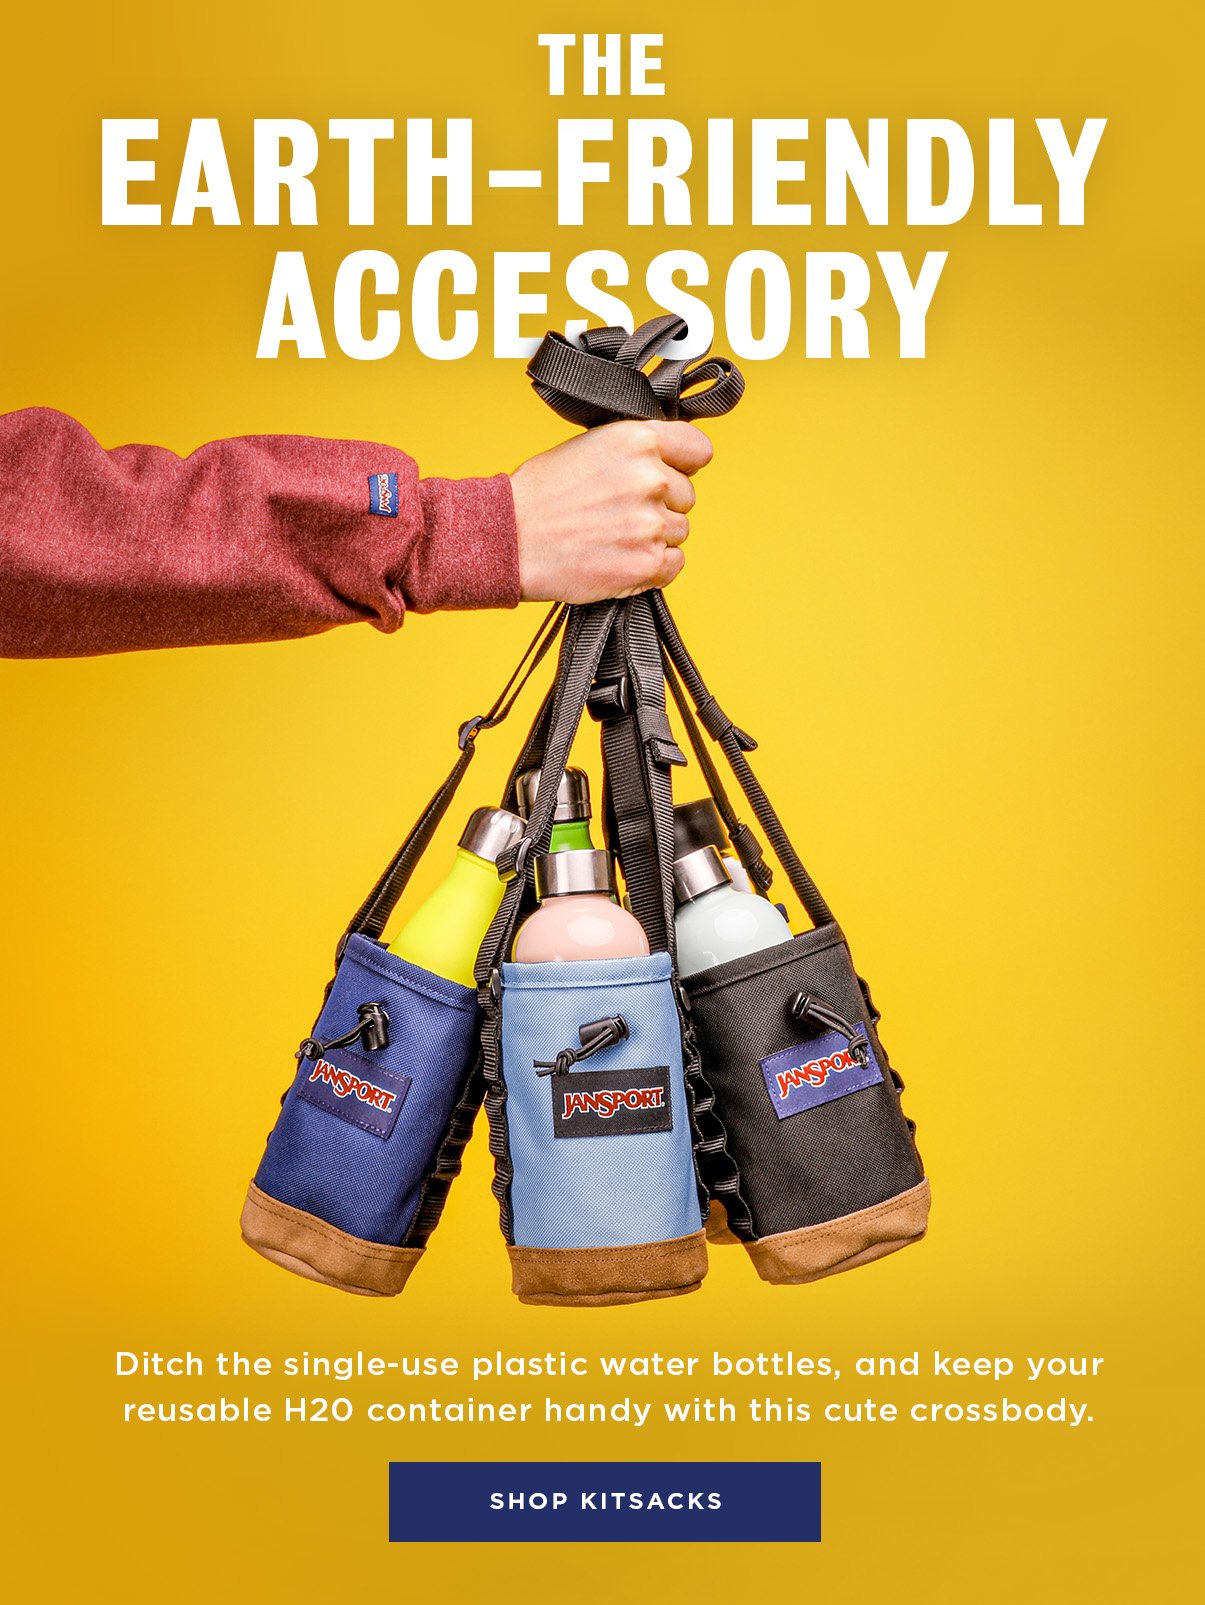 THE EARTH_FRIENDLY ACCESSORY Dith the single-use plastic water bottles, and keep your reusable H2O container handy with this cute crossbody. SHOP KITSACKS